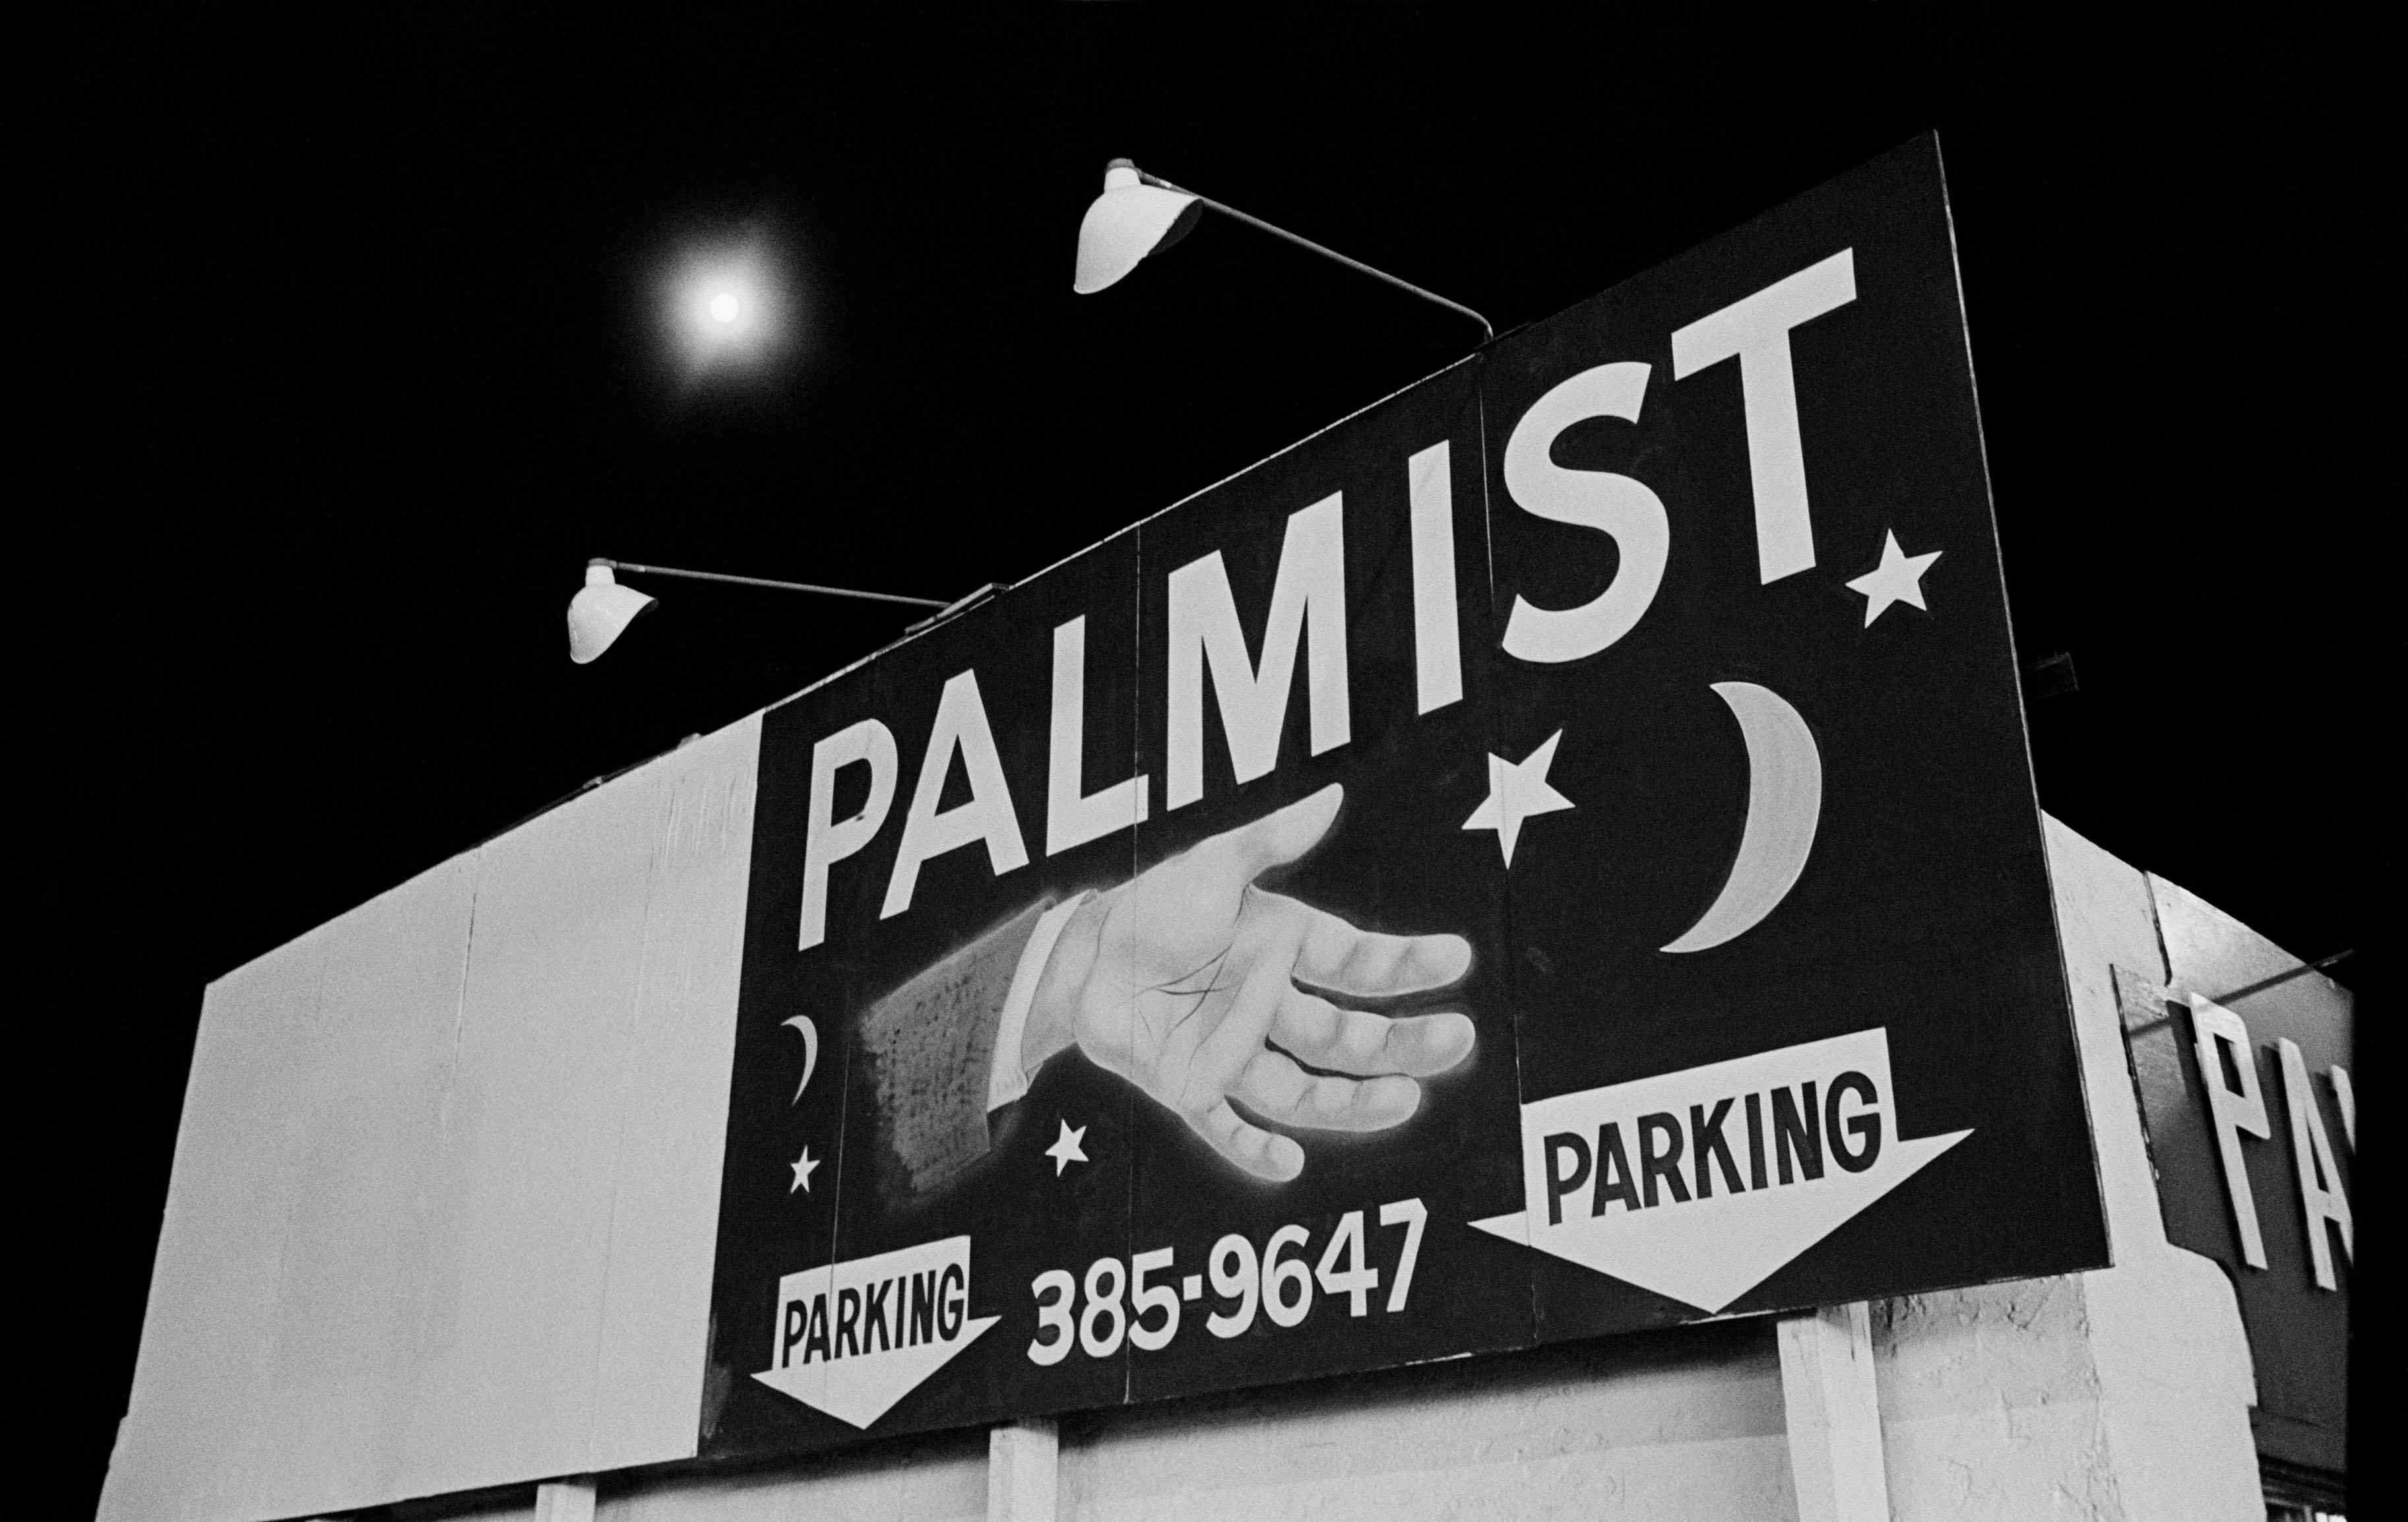 Michael Ormerod Black and White Photograph - The Palmist - Street photography, America, 20th Century, Robert Frank, Surreal